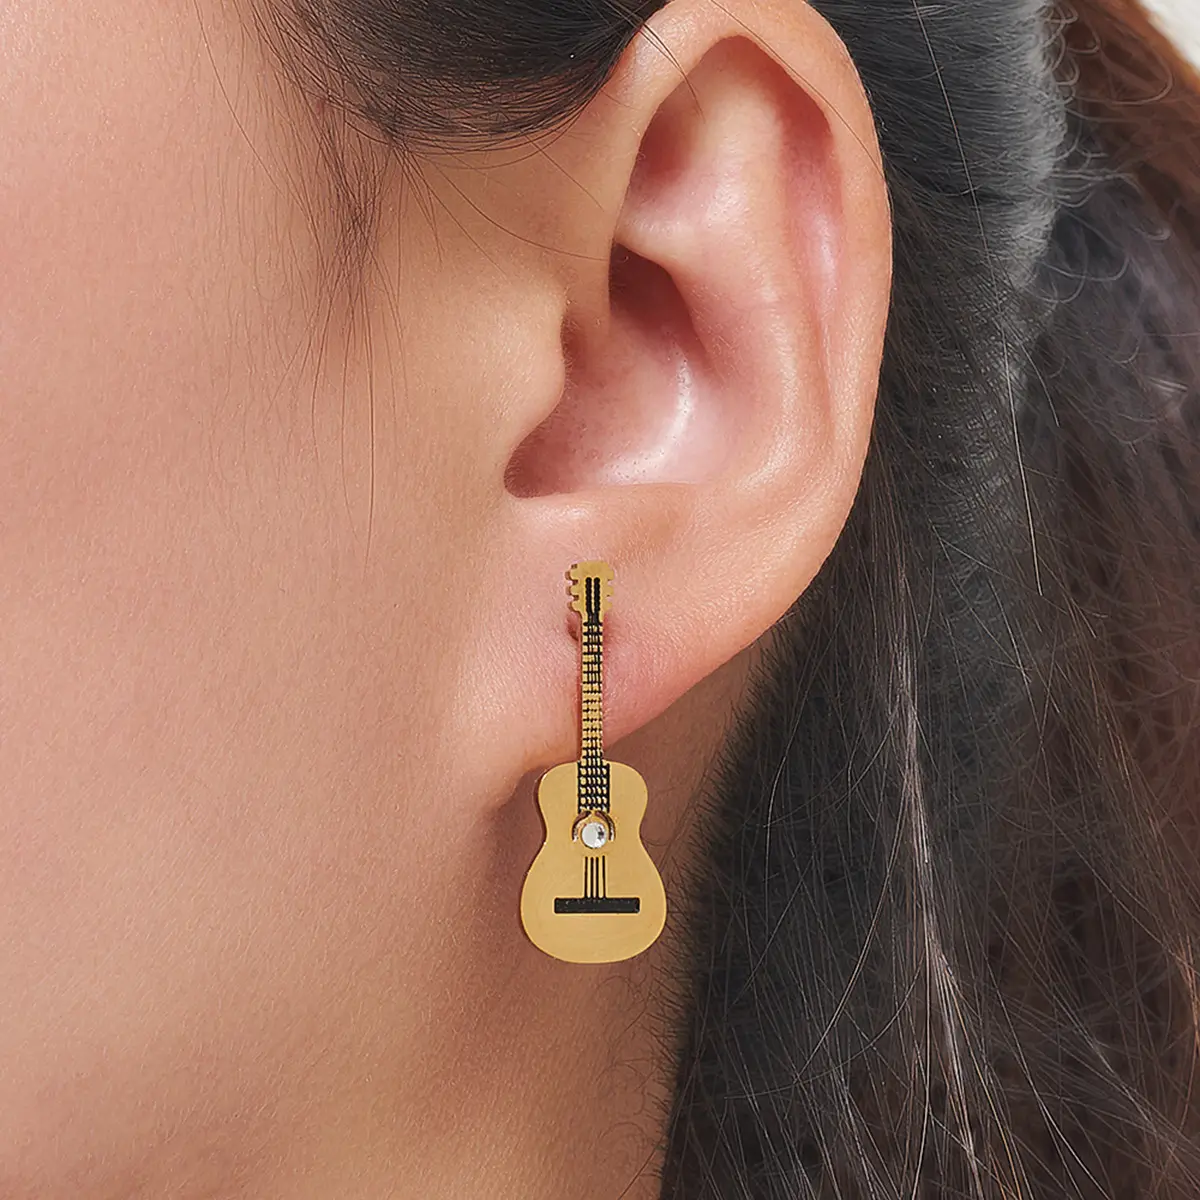 New Hip Hop Music Mini Earring PVD 18K Gold Plated 316L Stainless Steel Rhinestone Inlay Guitar Stud Earring